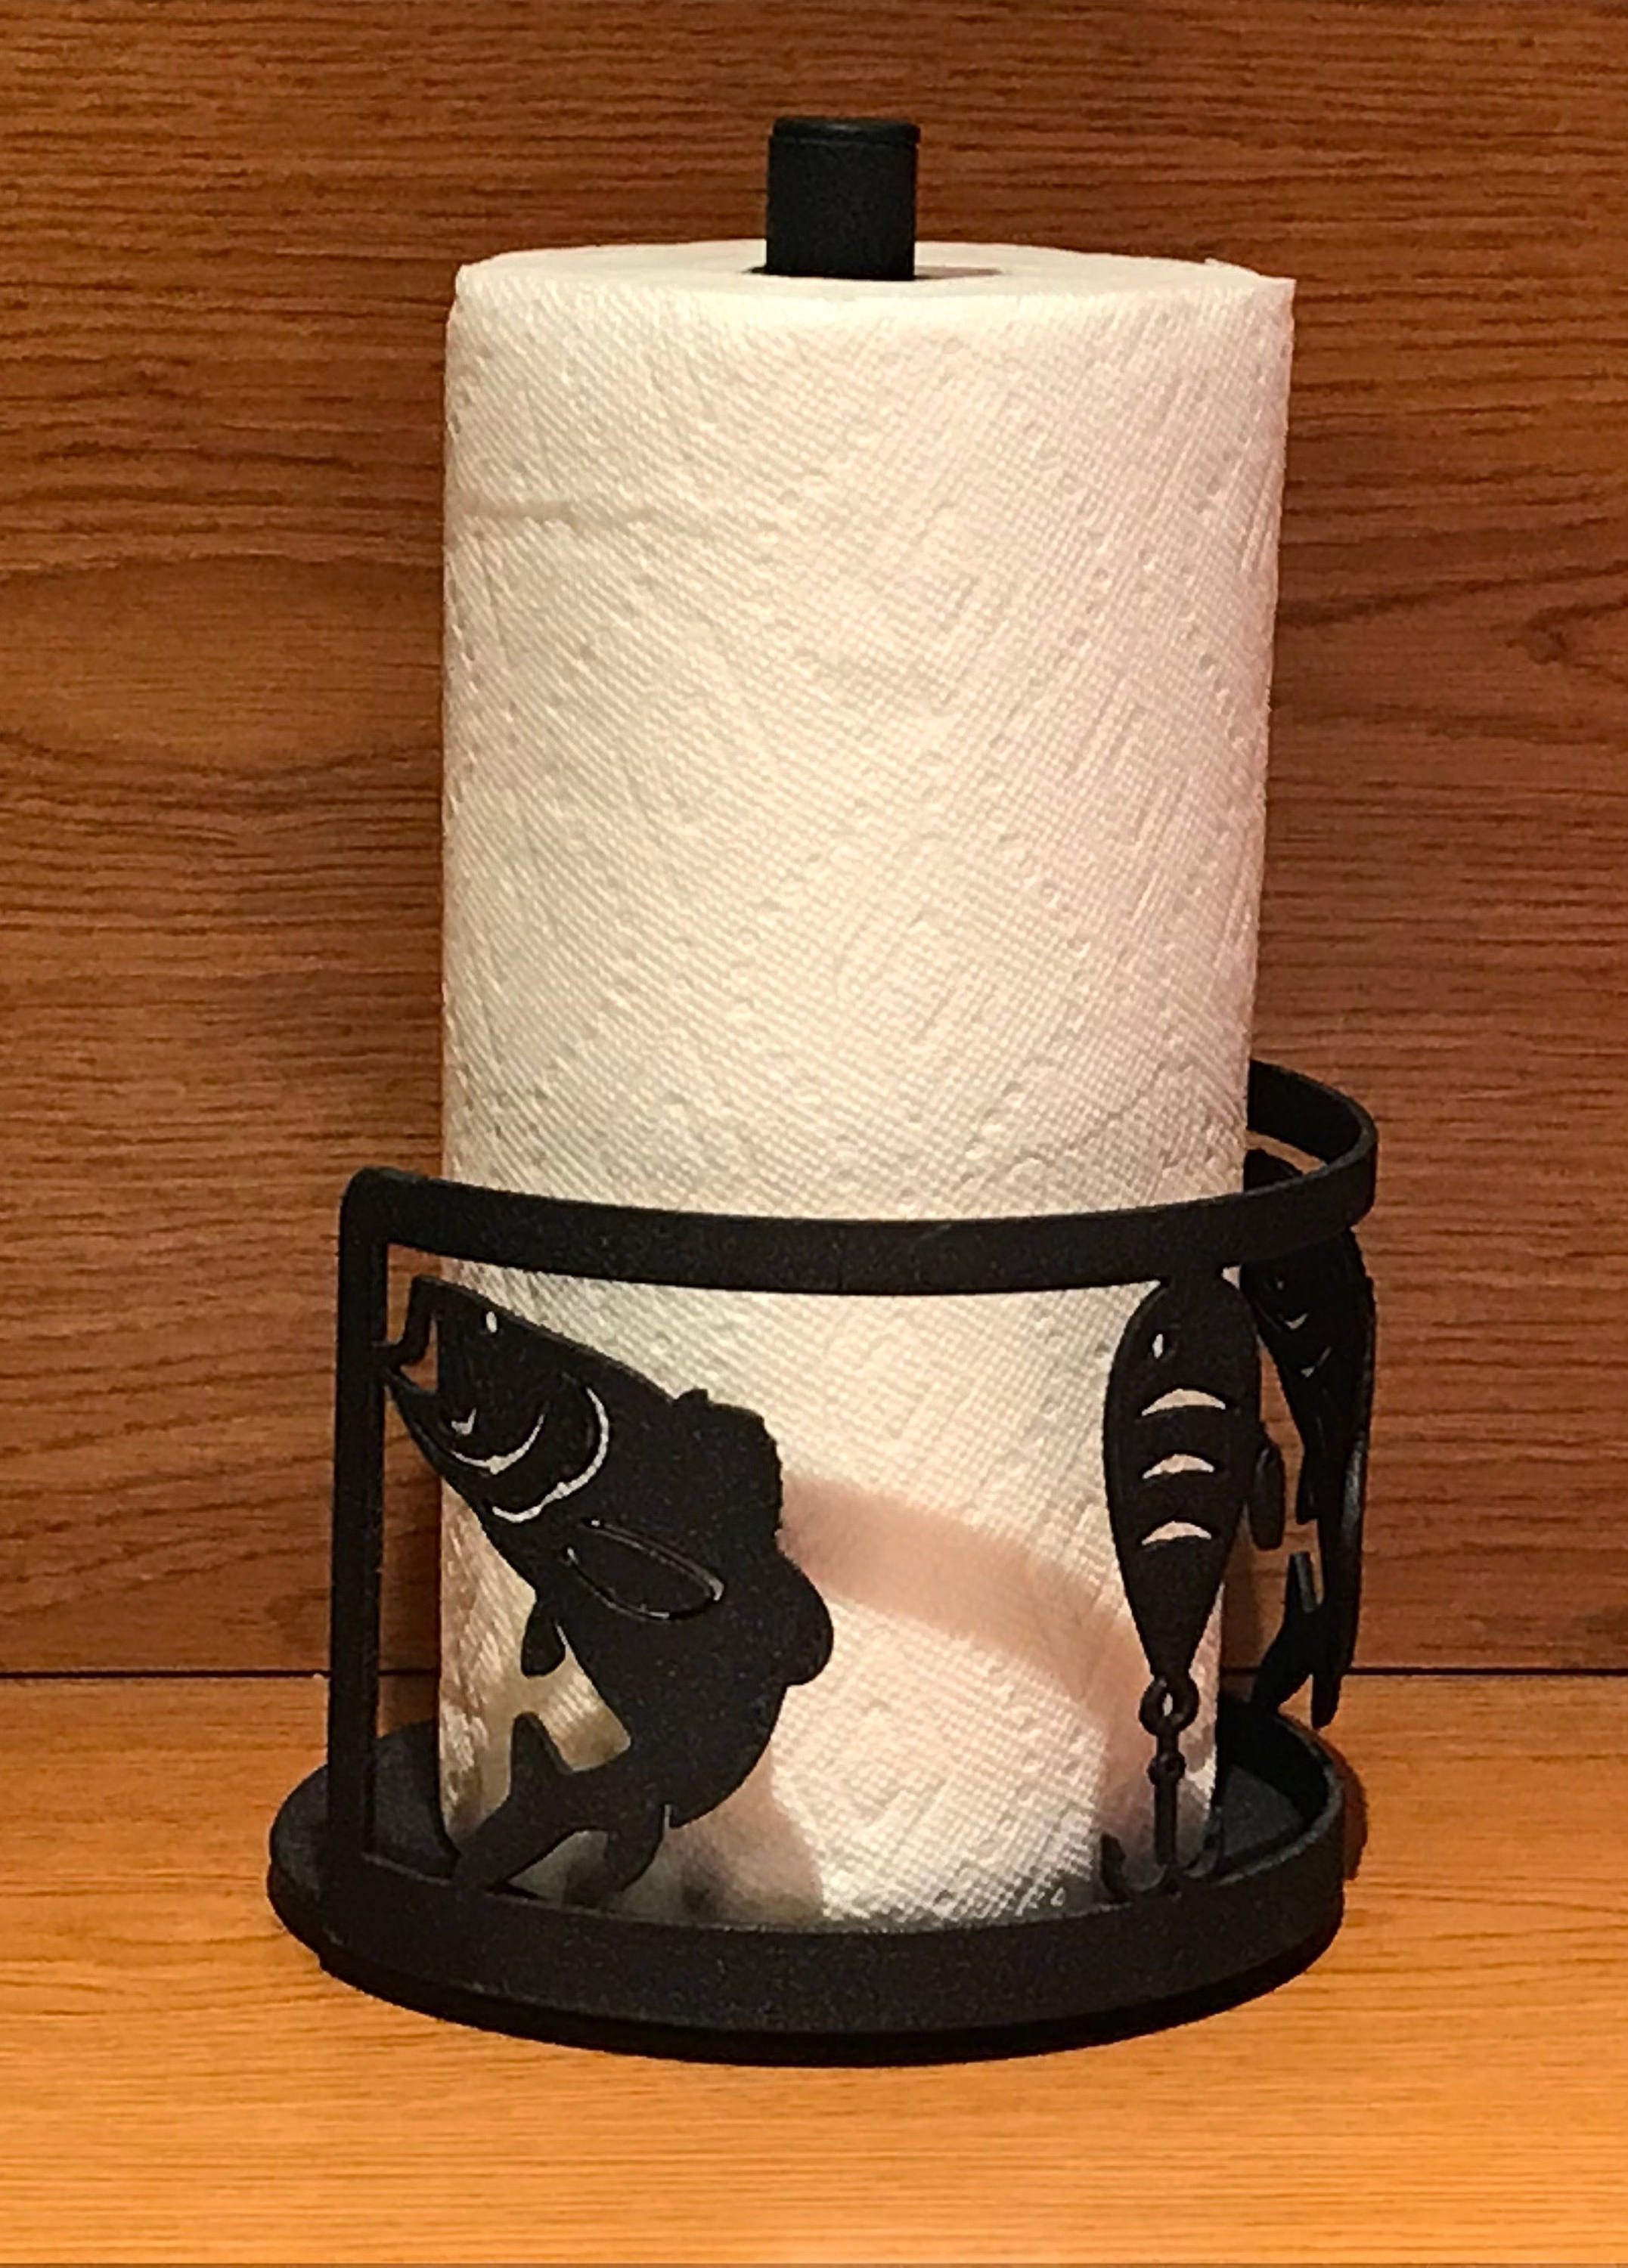 Bass paper towel holder, fishing, camping, outdoor life